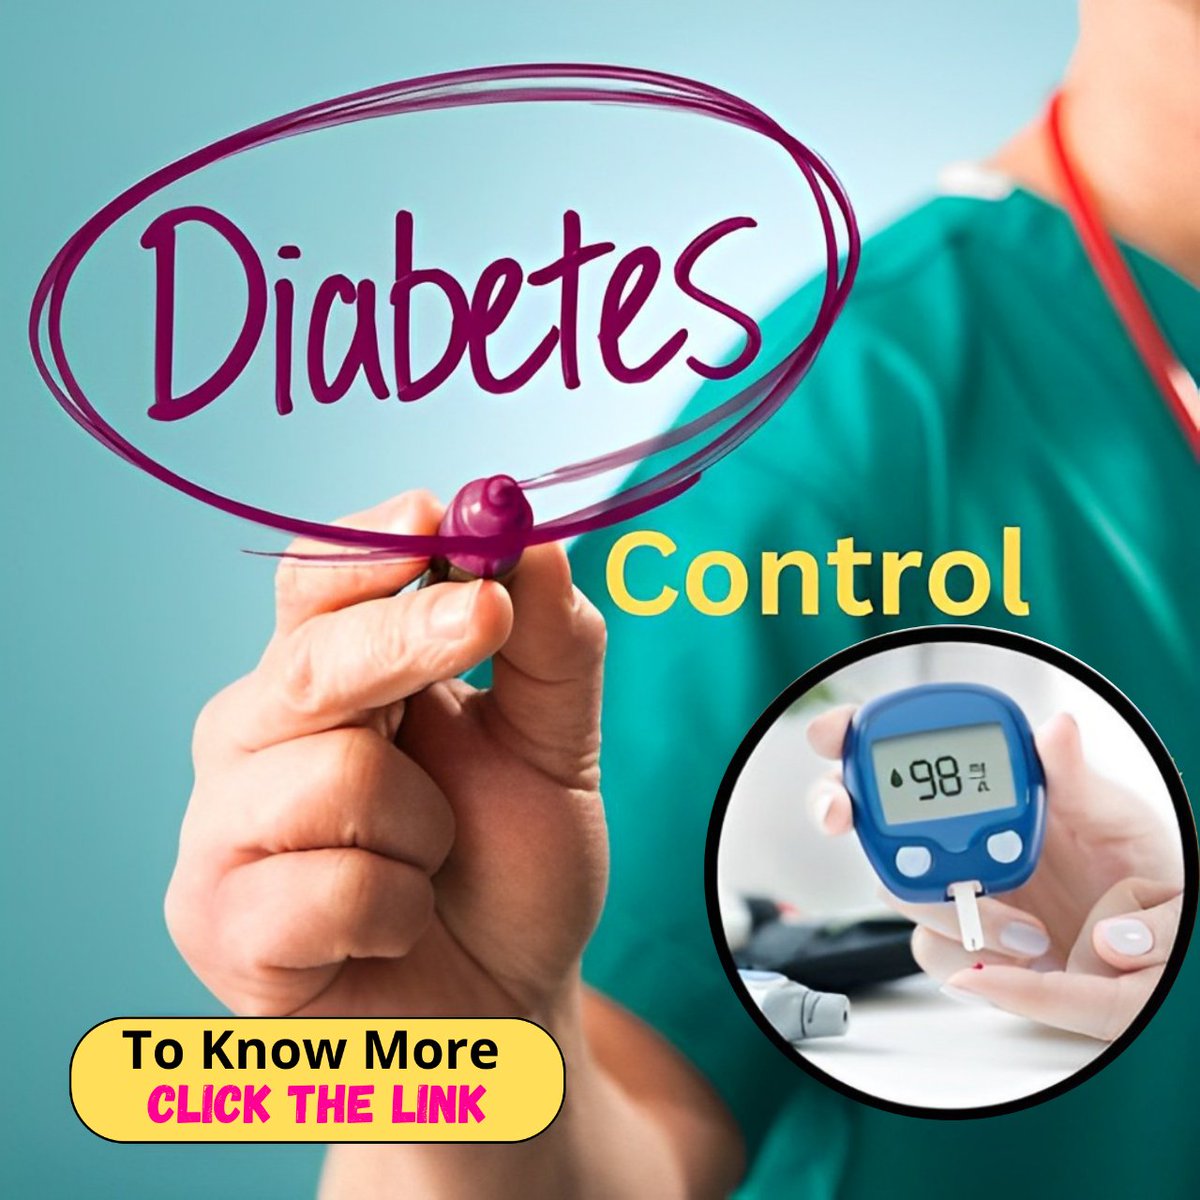 #diabetesmellitus #diabetesfriendly #diabetes2 
#diabetesdiet #life #diabetestype #diabeteslife 
#diabetestype2 #bloodsugar #health #diabetes
Say goodbye to high blood sugar levels with 
this innovative technique. Click To Learn More
👉 i.mtr.cool/kdygwkfkgy 👈